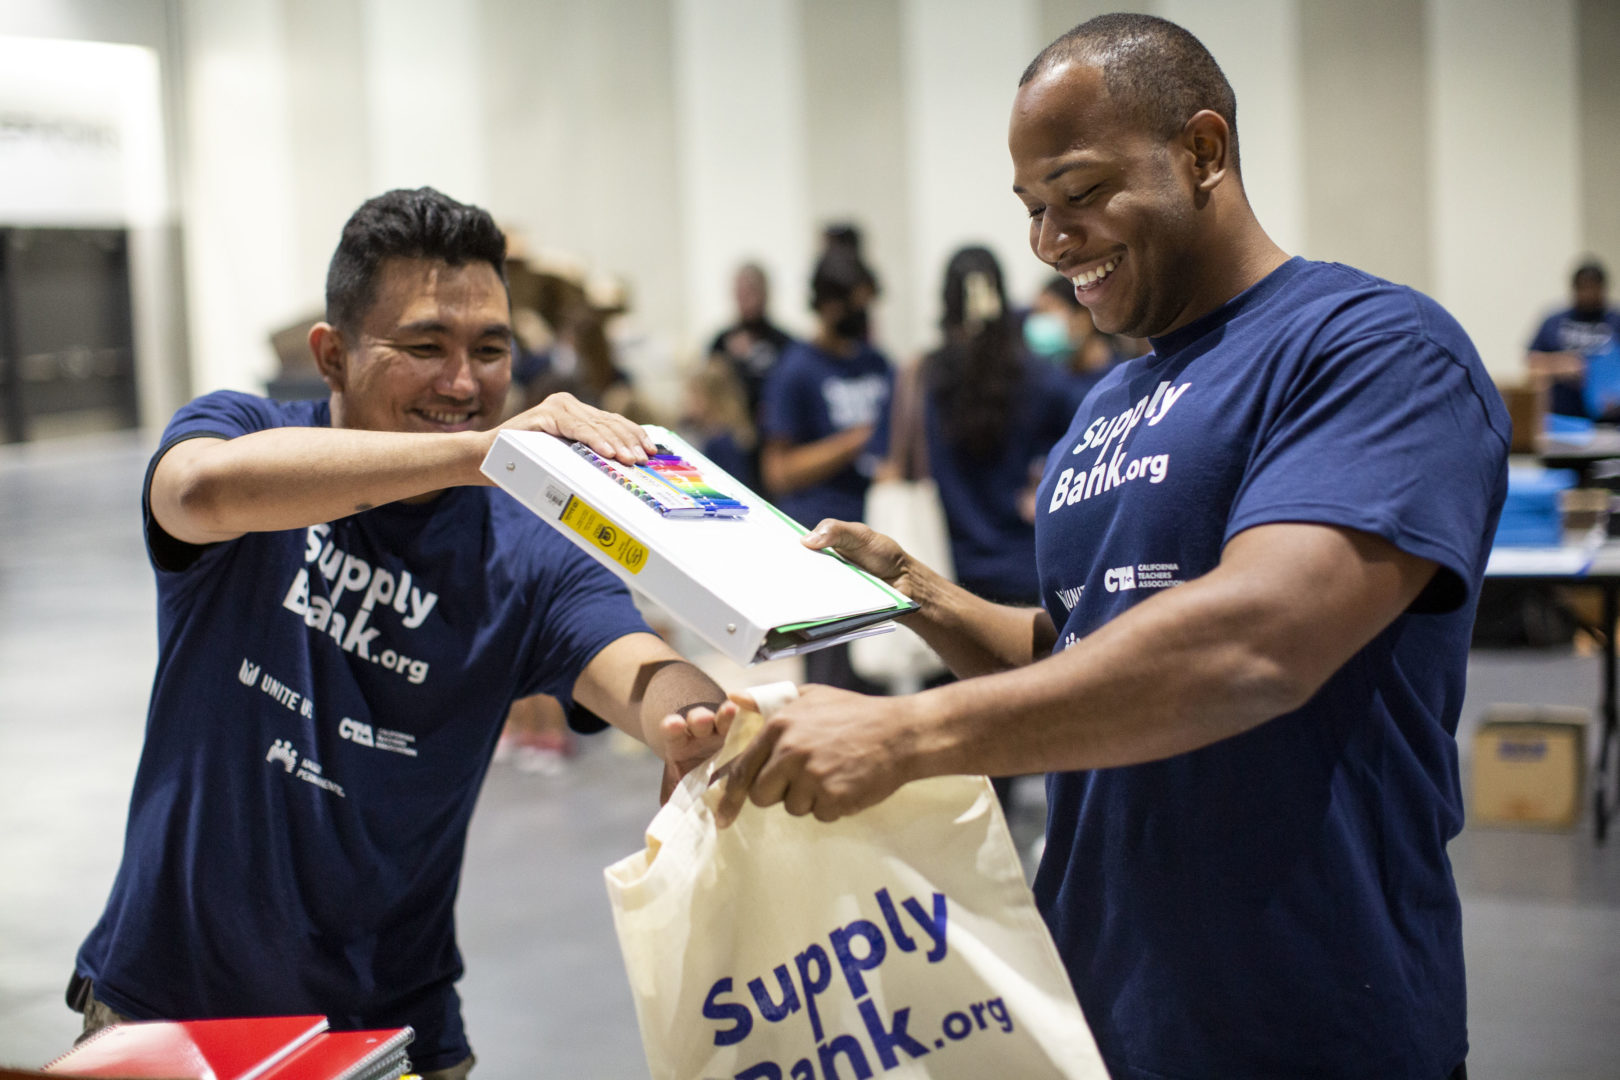 interior SupplyBank.org and KTVU’s Impact: Giving School Supplies to 615 Students in Need banner image